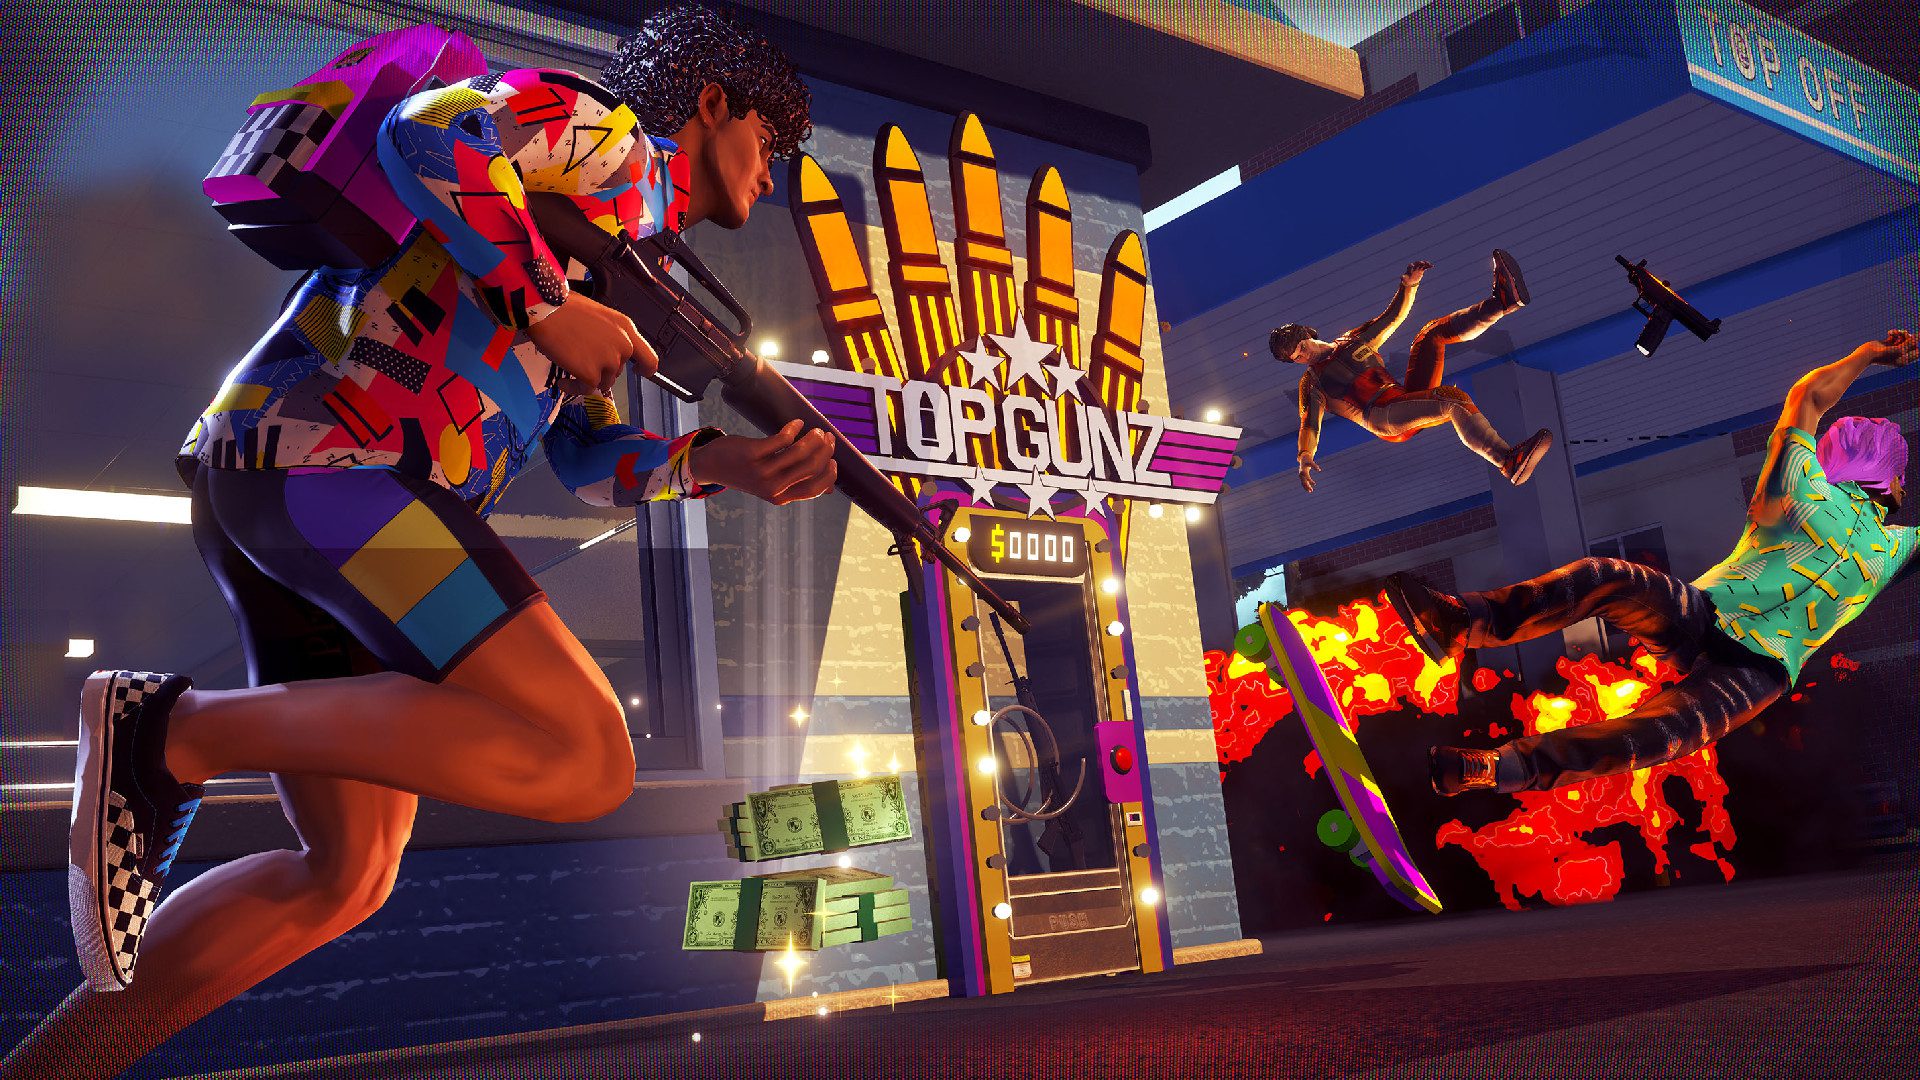 Boss Key Productions’ Next Game is Radical Heights, A Battle Royale Game